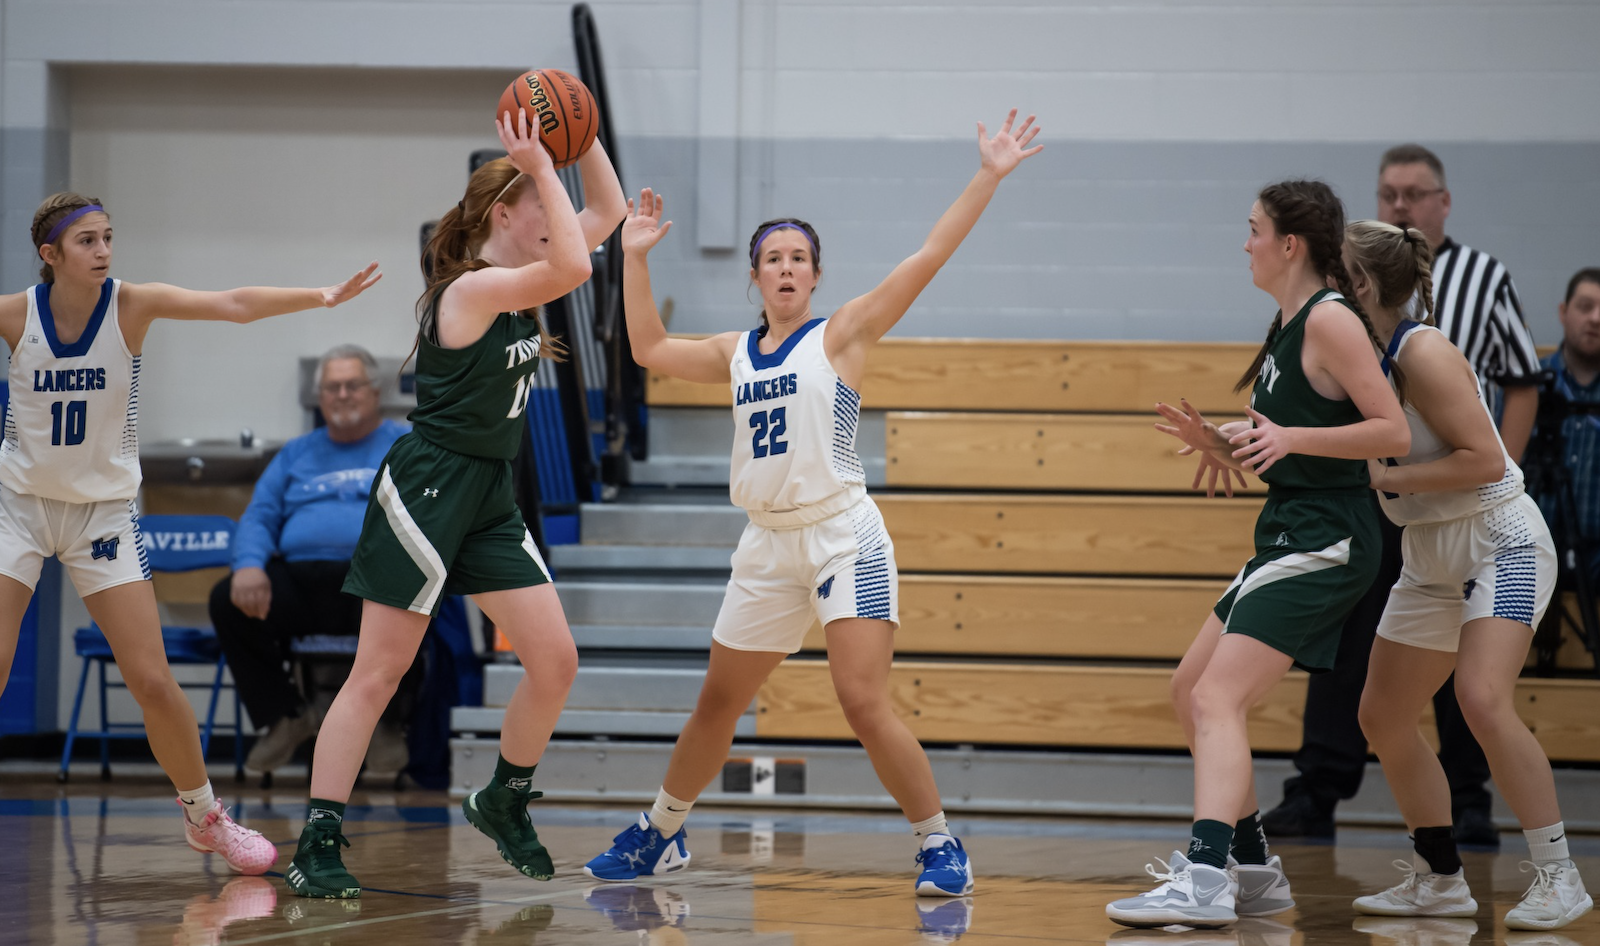 LaVille Lady Hoops v. Trinity gallery cover photo